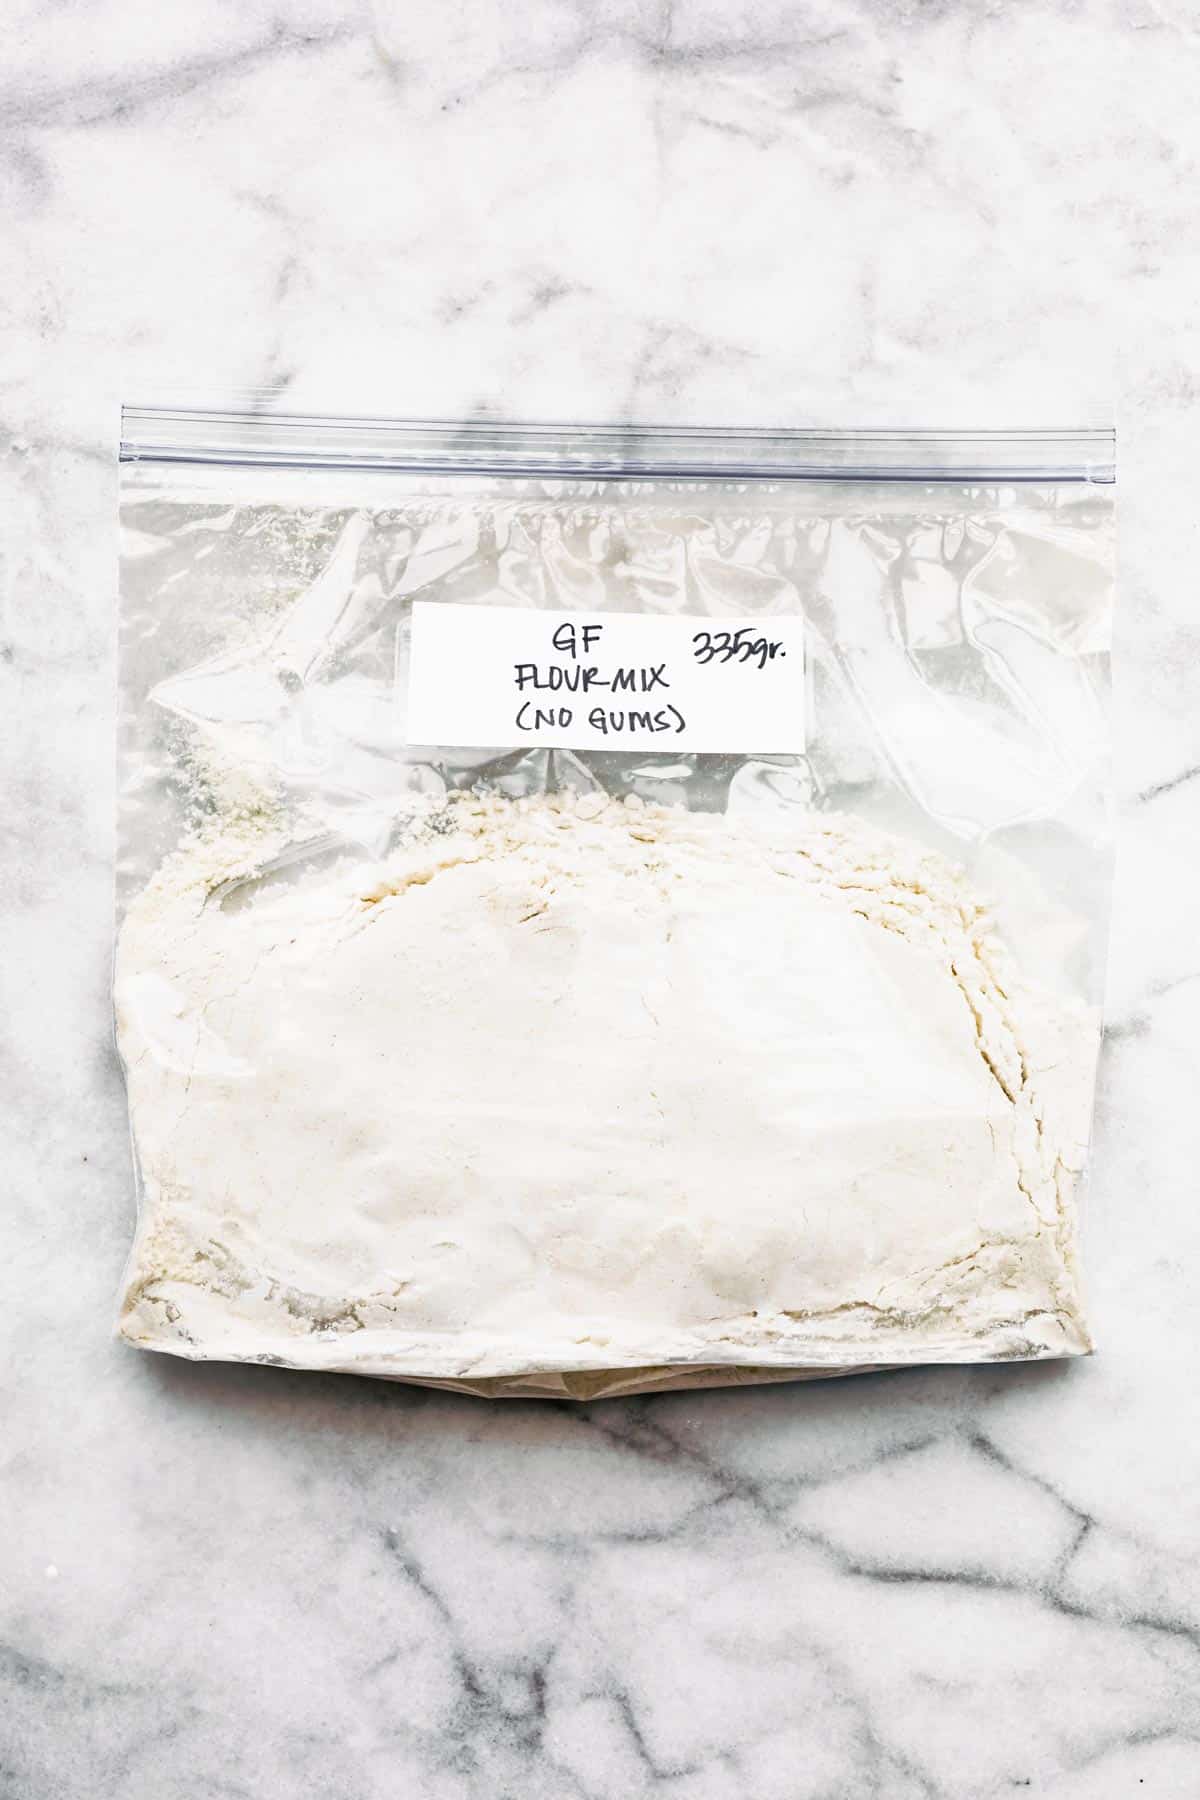 A ziploc bag with a homemade gluten free flour mix on a white marble countertop.